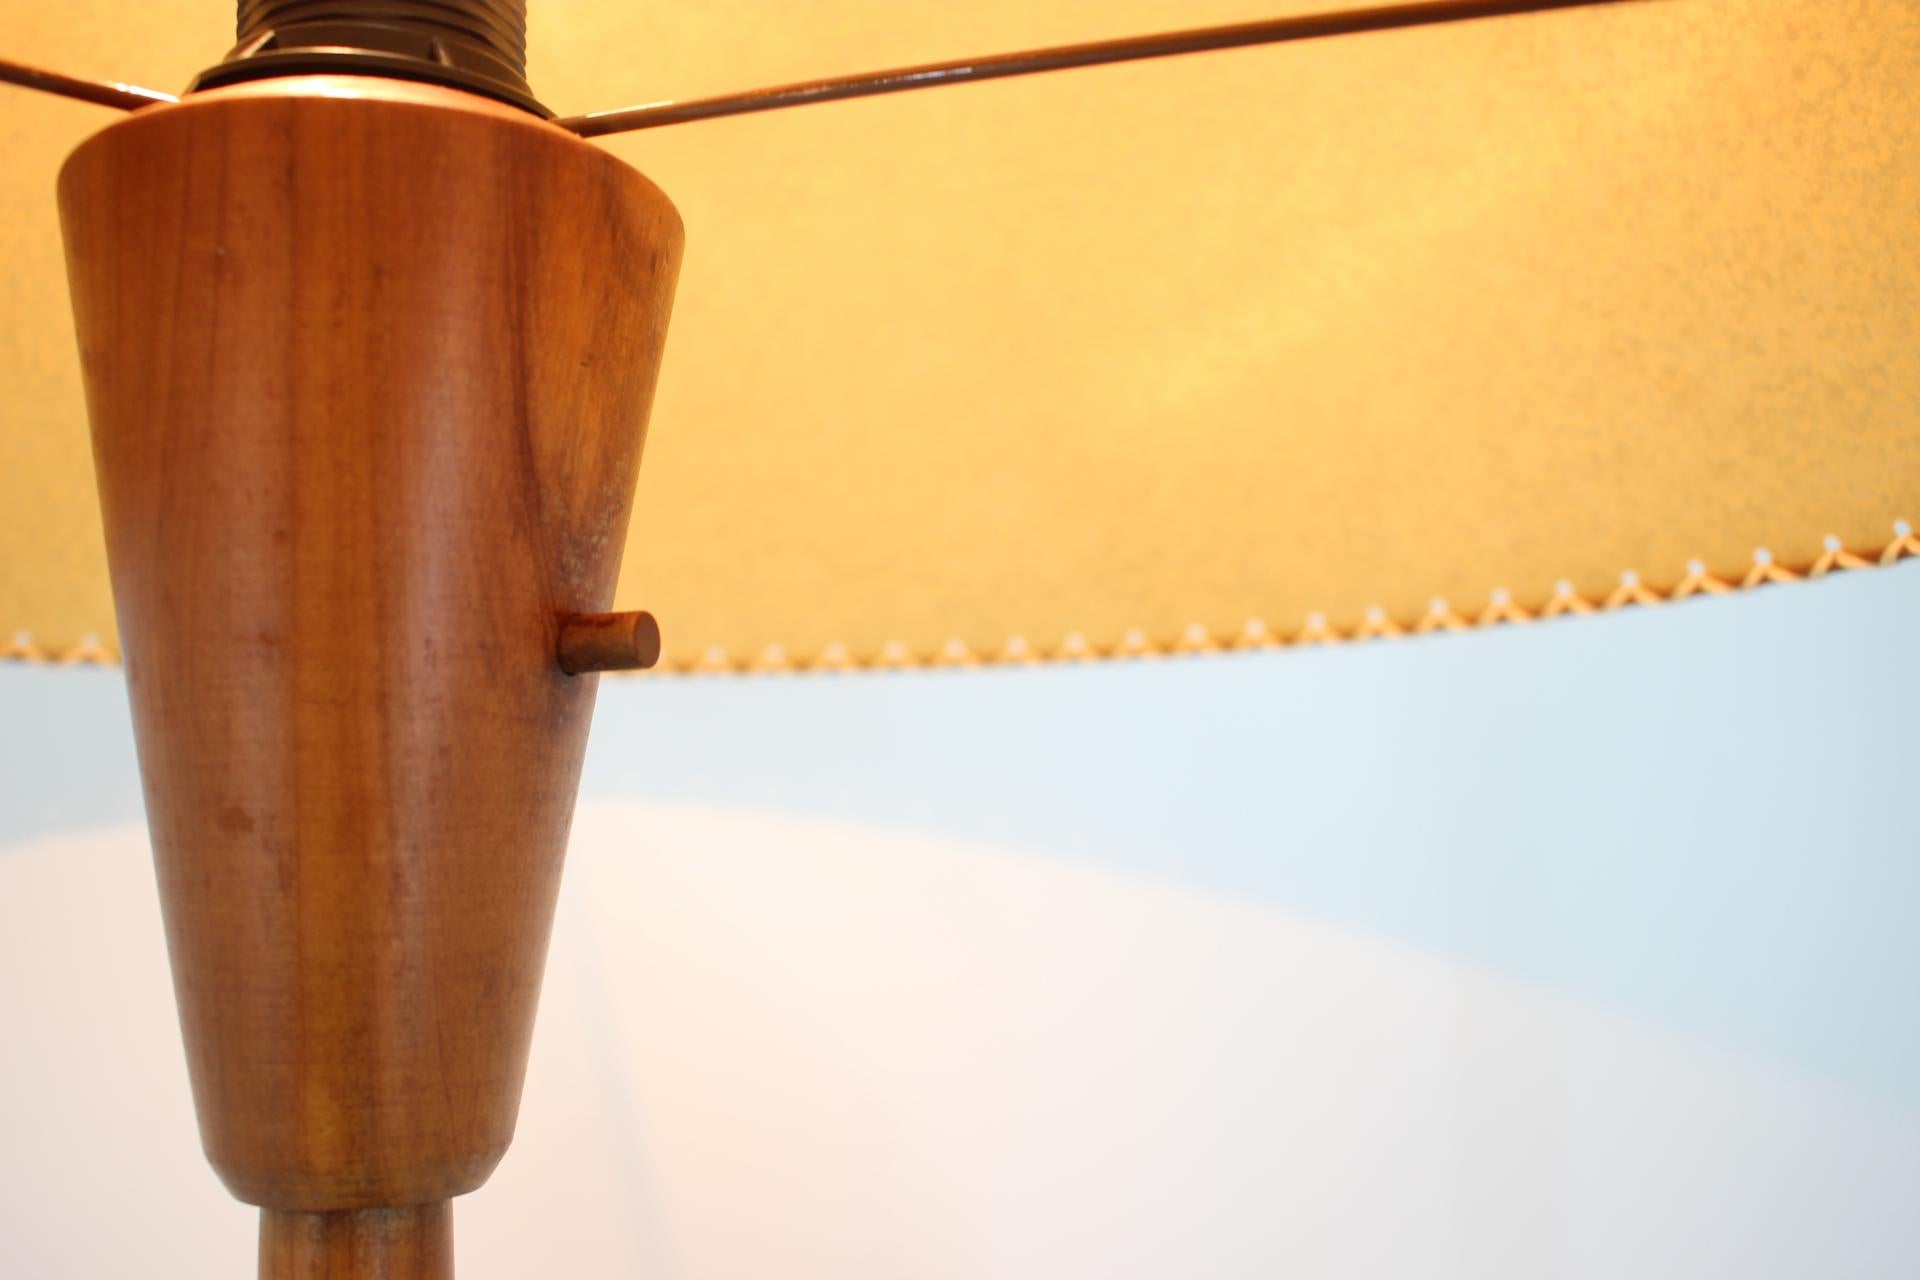 Mid-20th Century Midcentury Wooden Floor Lamp by Jan Kalous for ULUV / 1950s, Restored For Sale